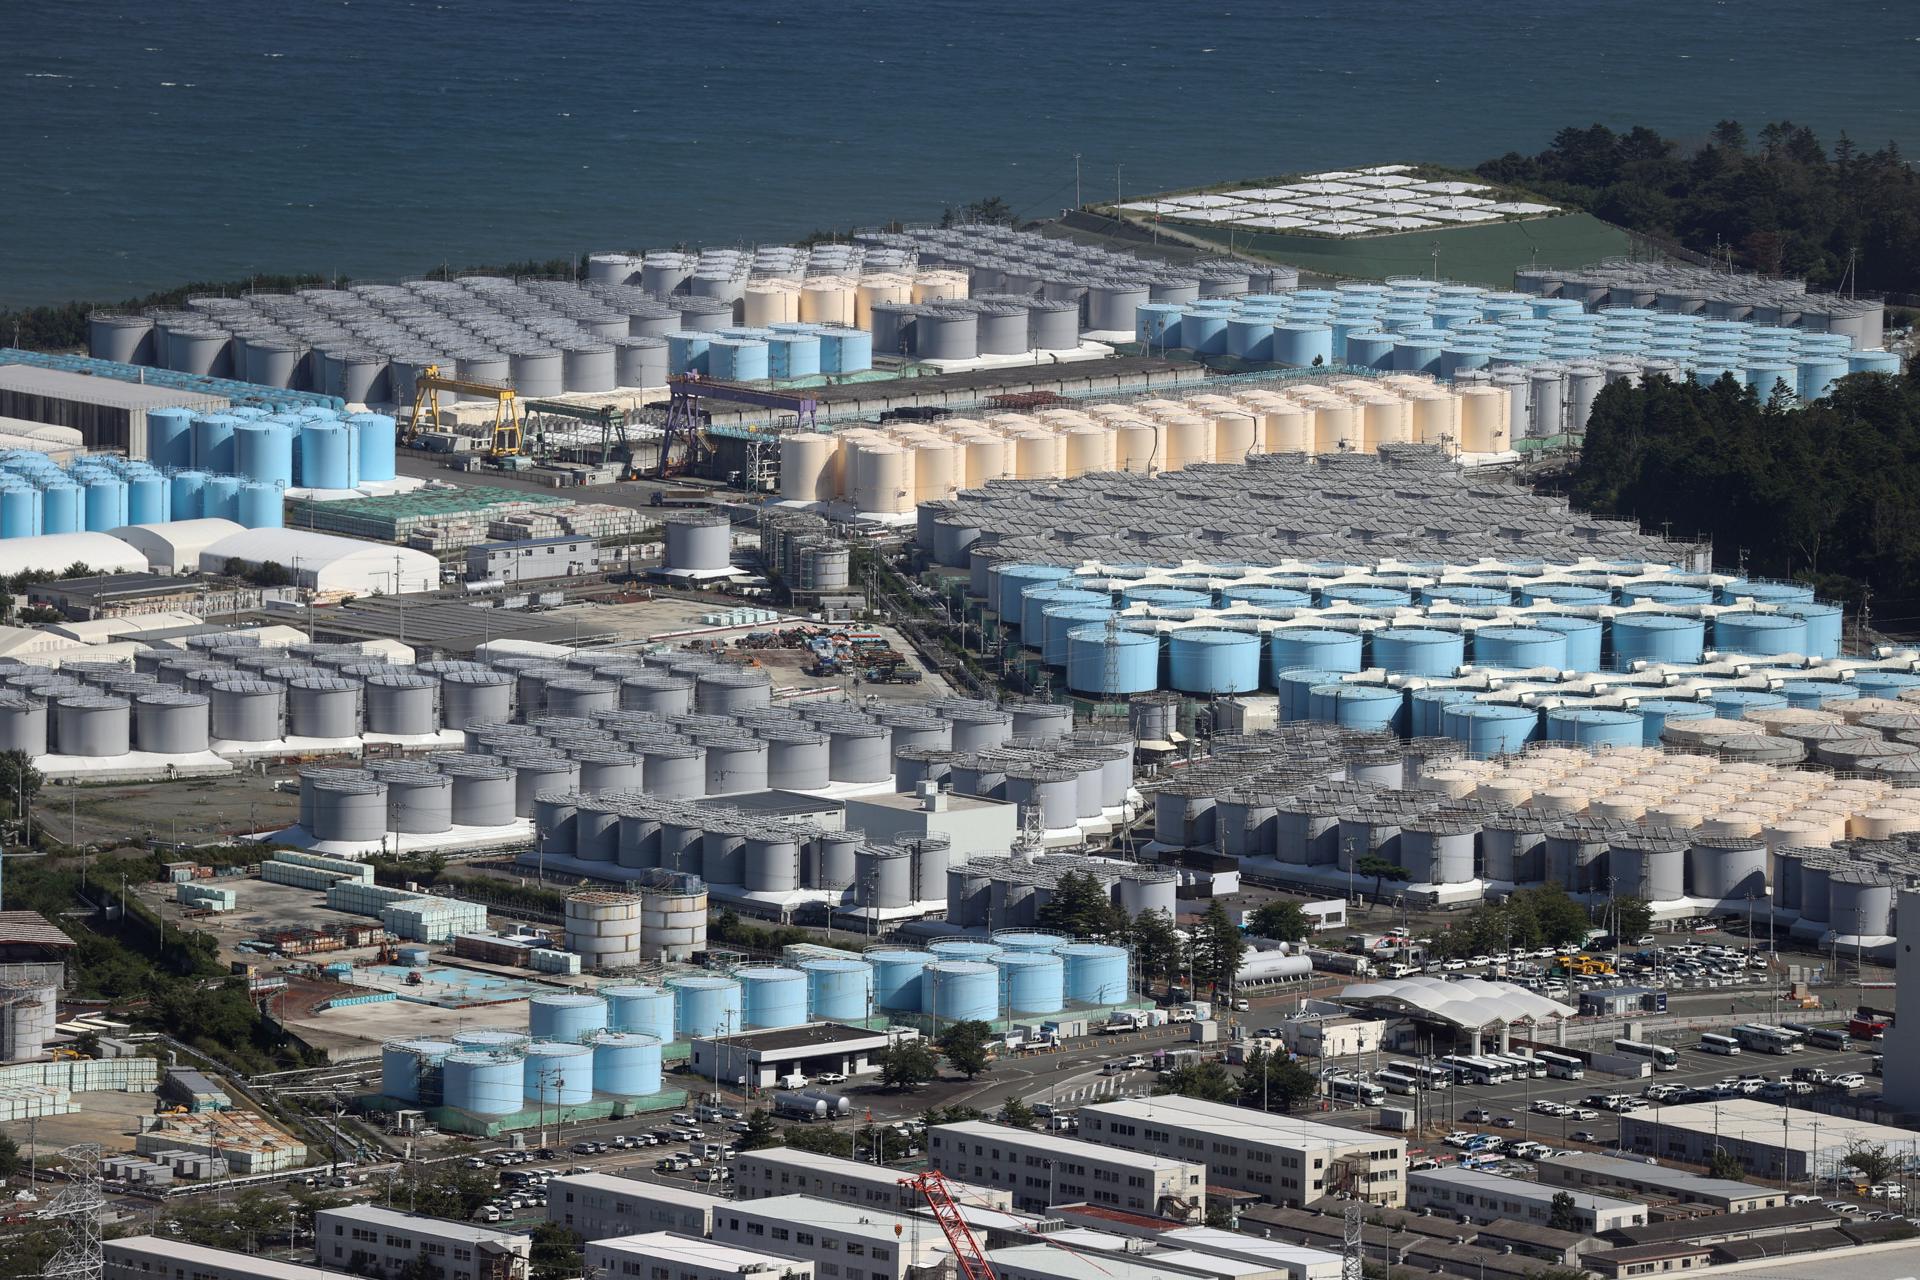 This aerial picture from a Jiji Press charter aircraft shows tanks containing radioactive water at the Fukushima Daiichi nuclear power plant in Okuma, Fukushima Prefecture, Japan, 24 August 2023 (issued 05 October 2023). On 05 October 2023, plant operator Tokyo Electric Power Company Holdings Inc. (TEPCO) started the second offshore discharge of treated radioactive water containing radioactive tritium diluted with a large amount of seawater from the Fukushima nuclear power plant into the Pacific Ocean. (Japón, Tokio) EFE/EPA/JIJI PRESS JAPAN OUT EDITORIAL USE ONLY